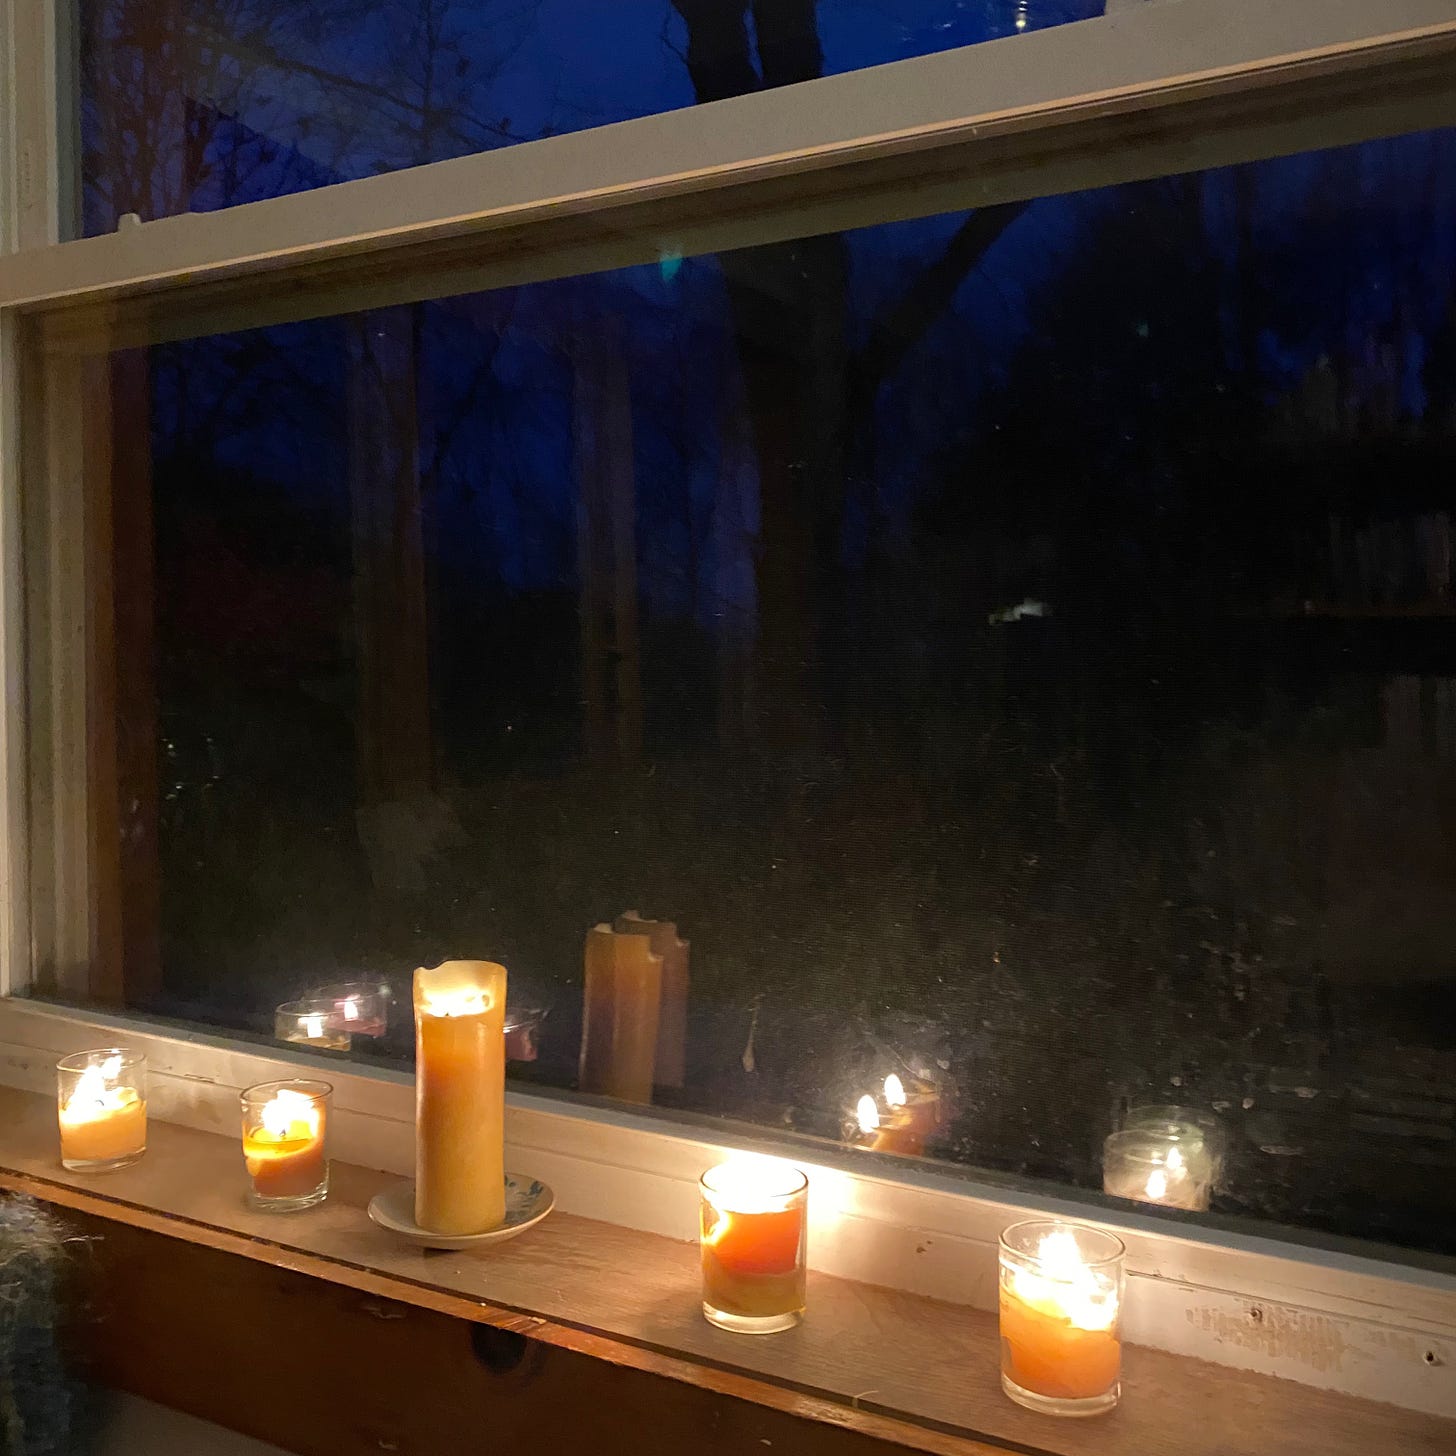 Five small lit candles on a windowsill. The sky outside the window is a deep, dark, pre-dawn blue. A few black tree branches are visible.